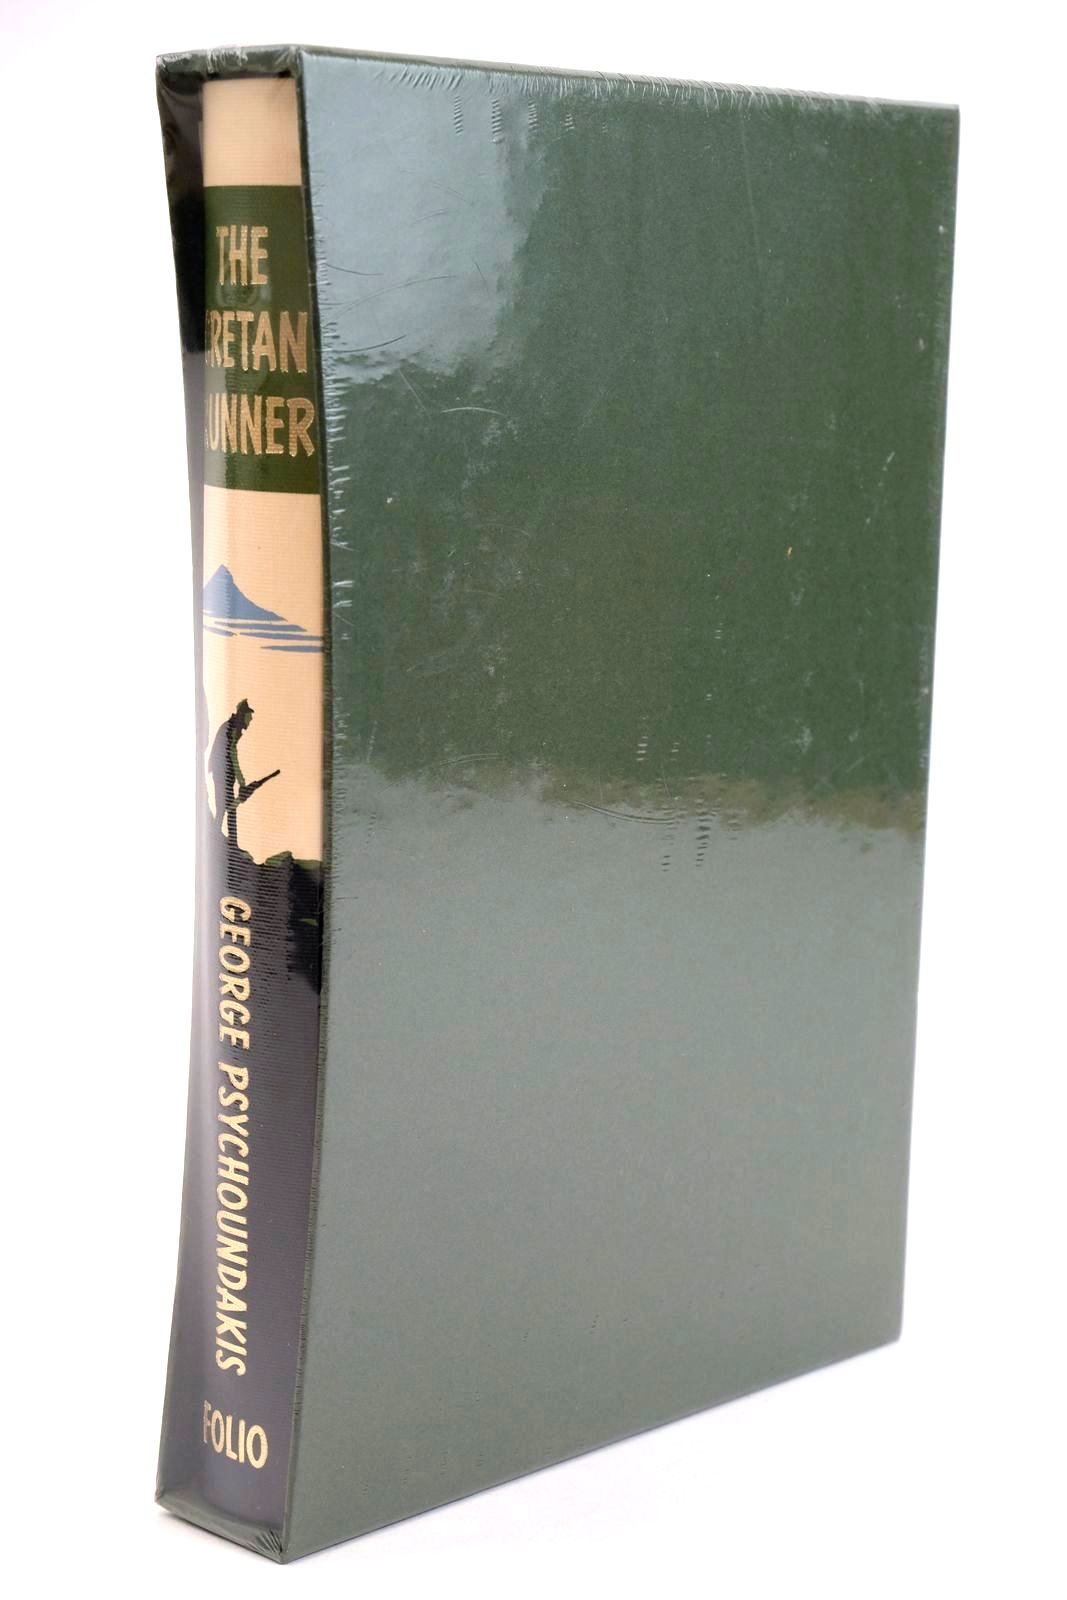 Photo of THE CRETAN RUNNER written by Psychoundakis, George Fermor, Patrick Leigh published by Folio Society (STOCK CODE: 1323349)  for sale by Stella & Rose's Books